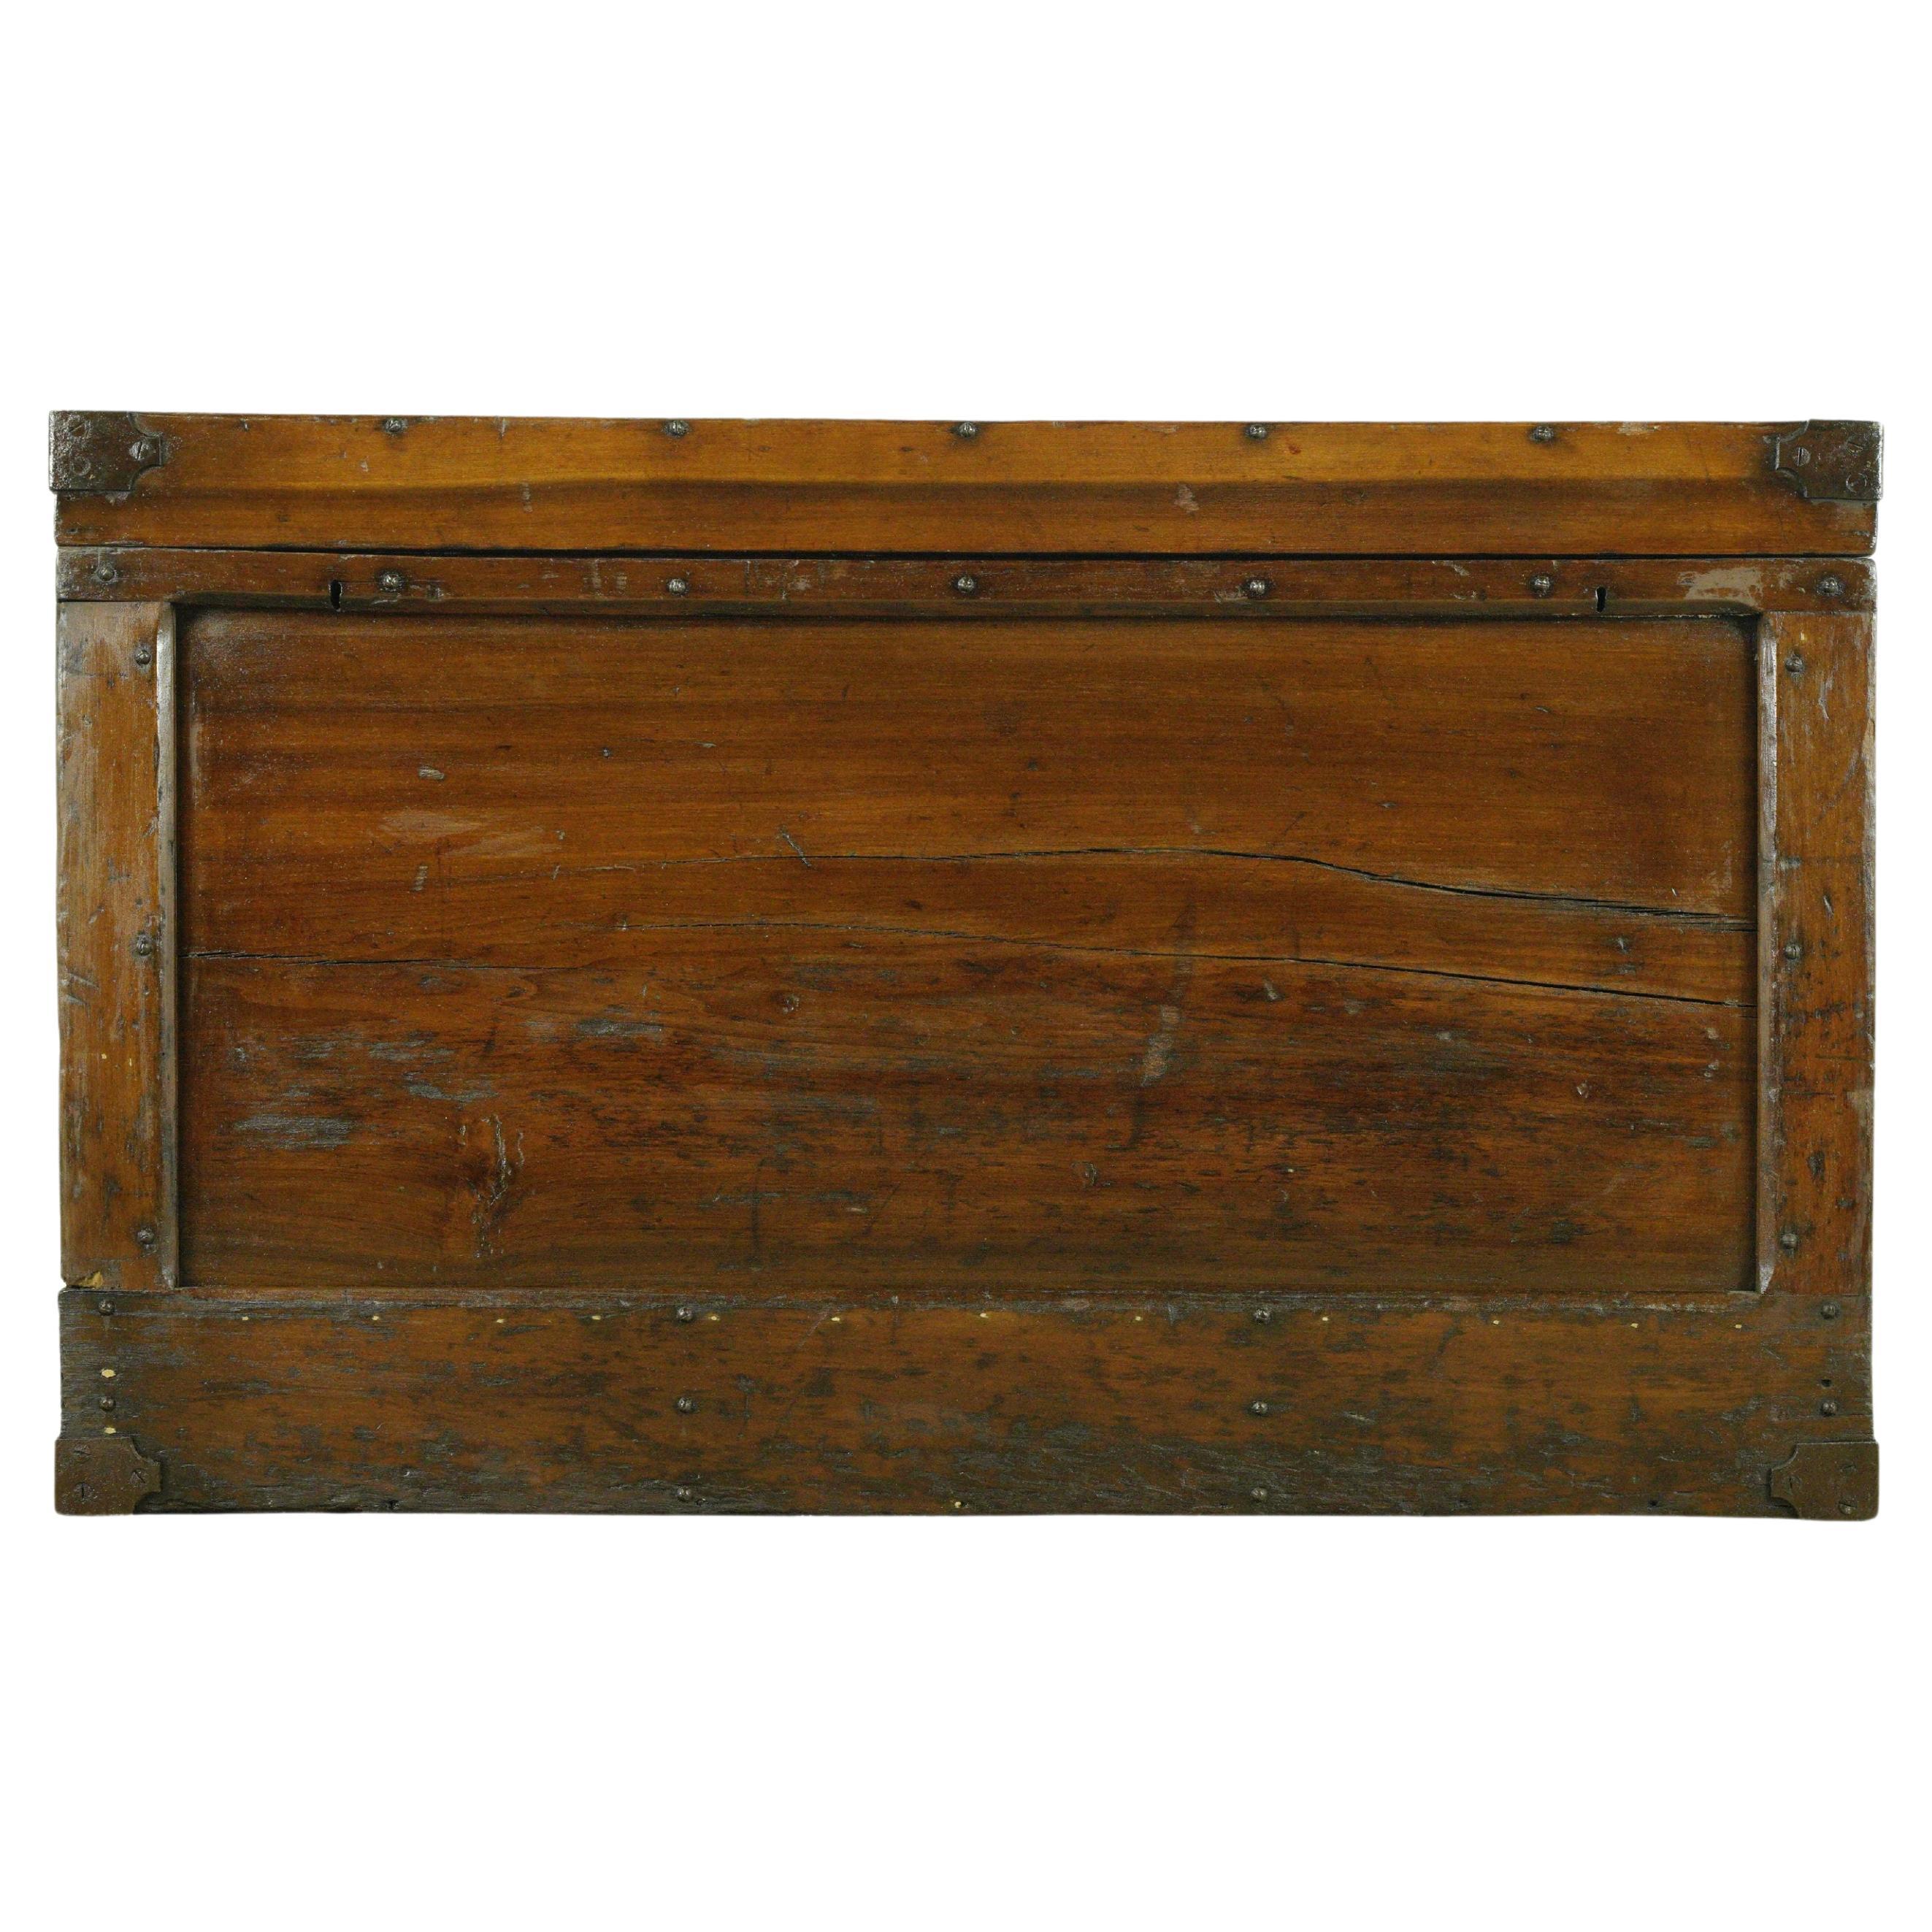 1800s Pine C.H. Tenney Trunk with Leather Straps For Sale